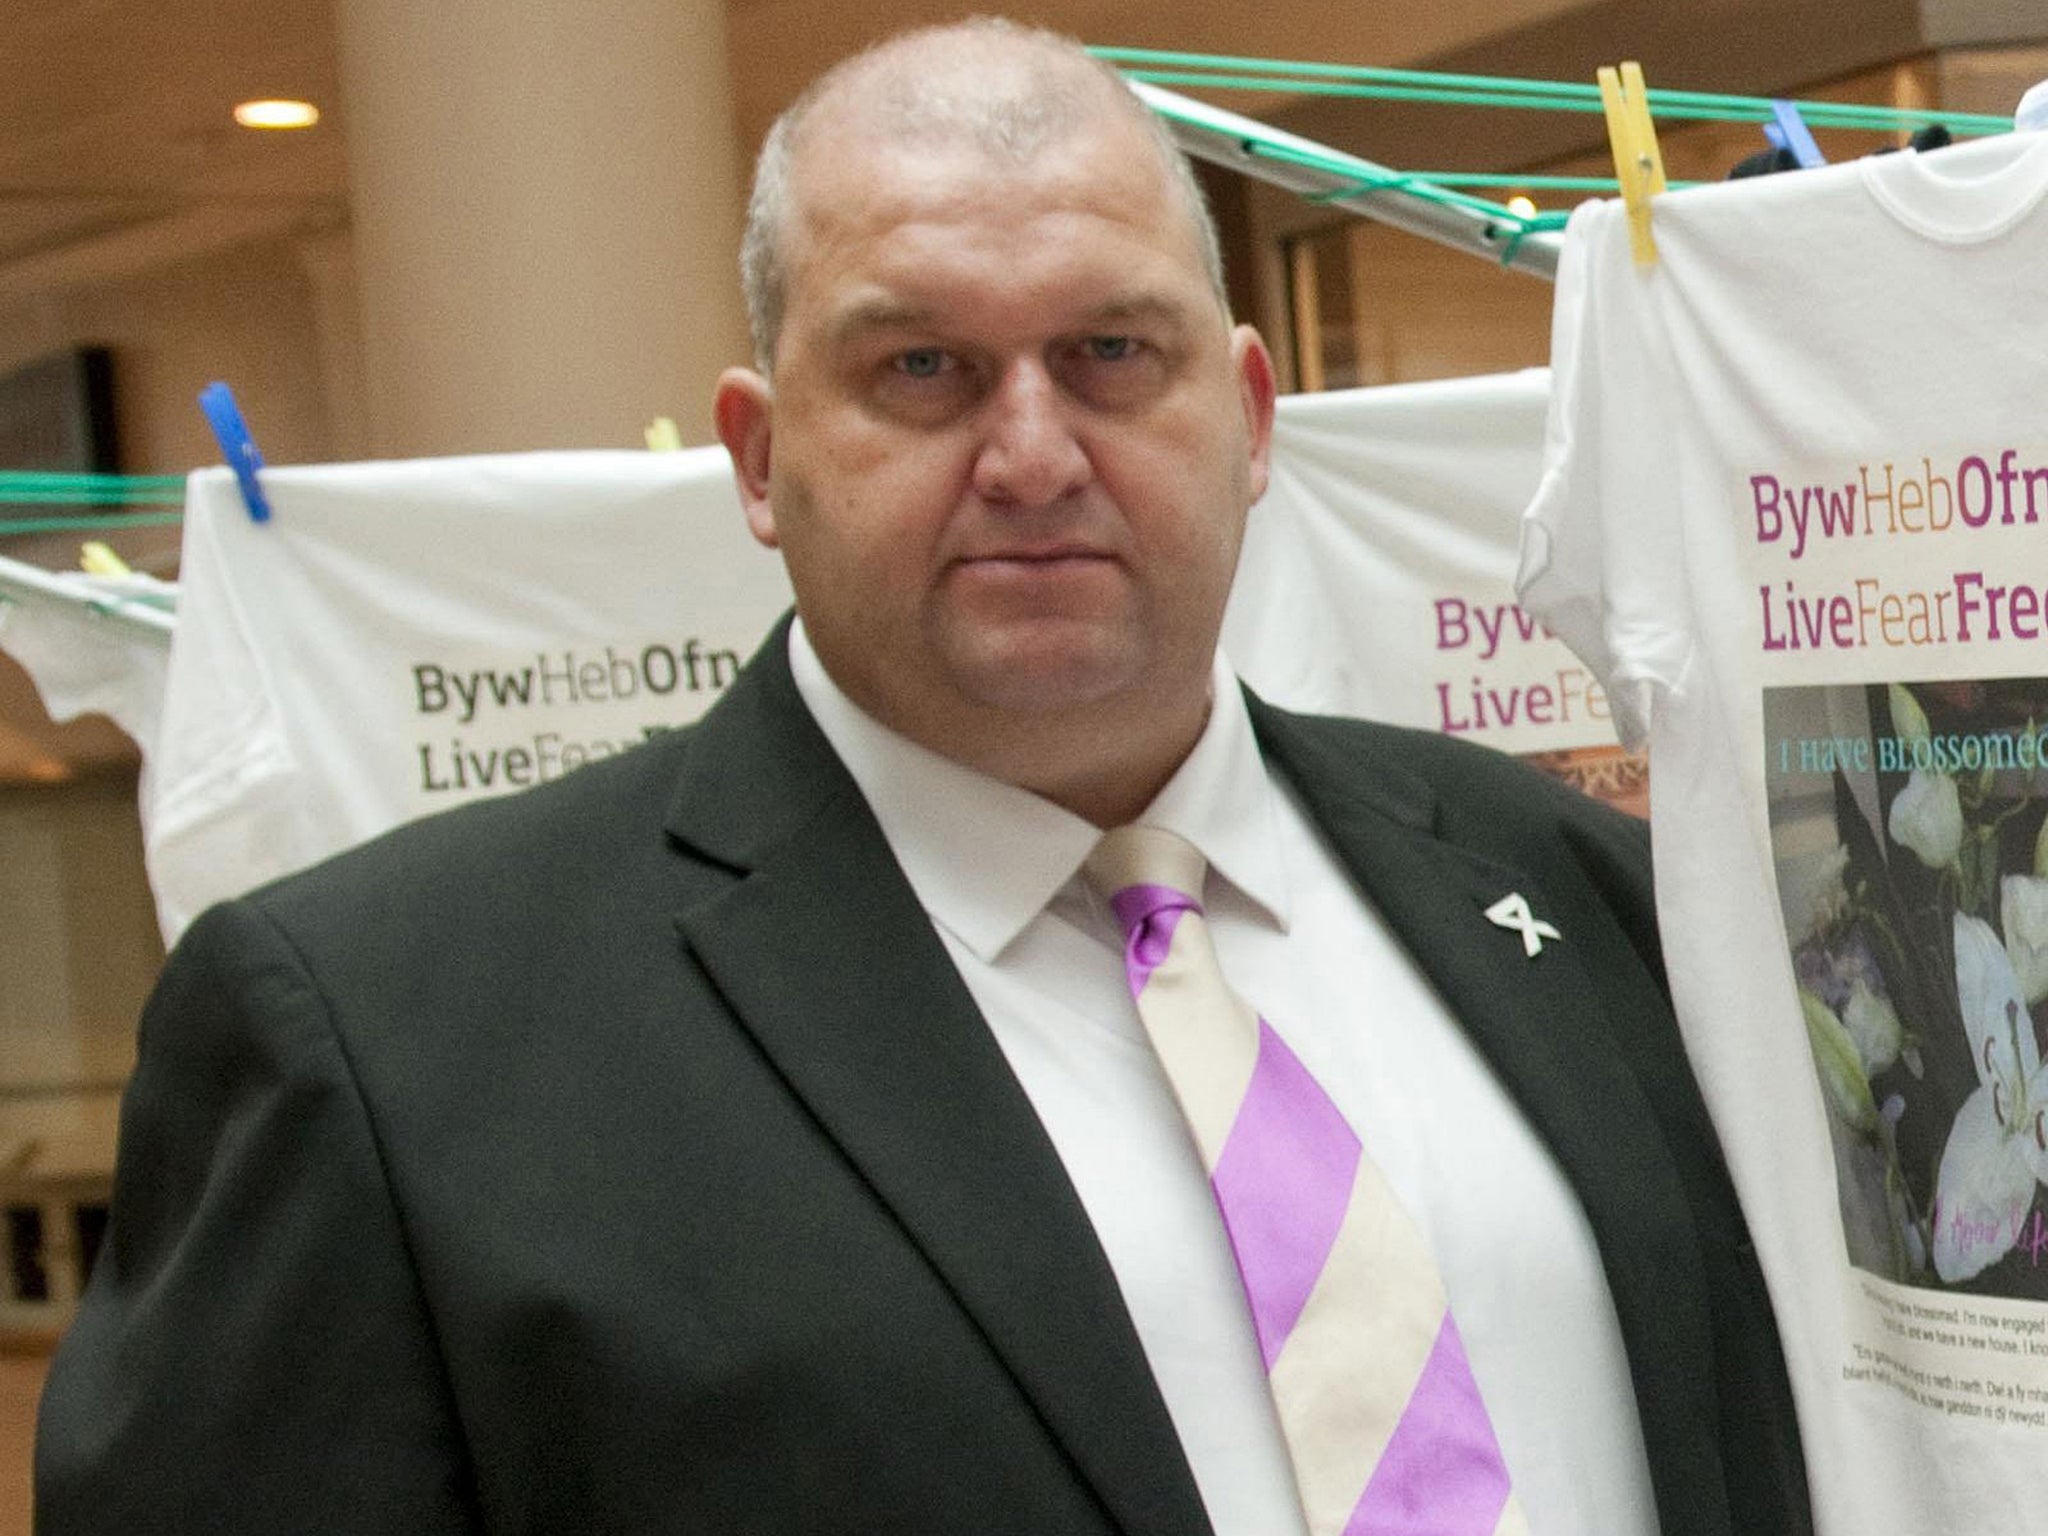 Former Welsh government minister Carl Sargeant